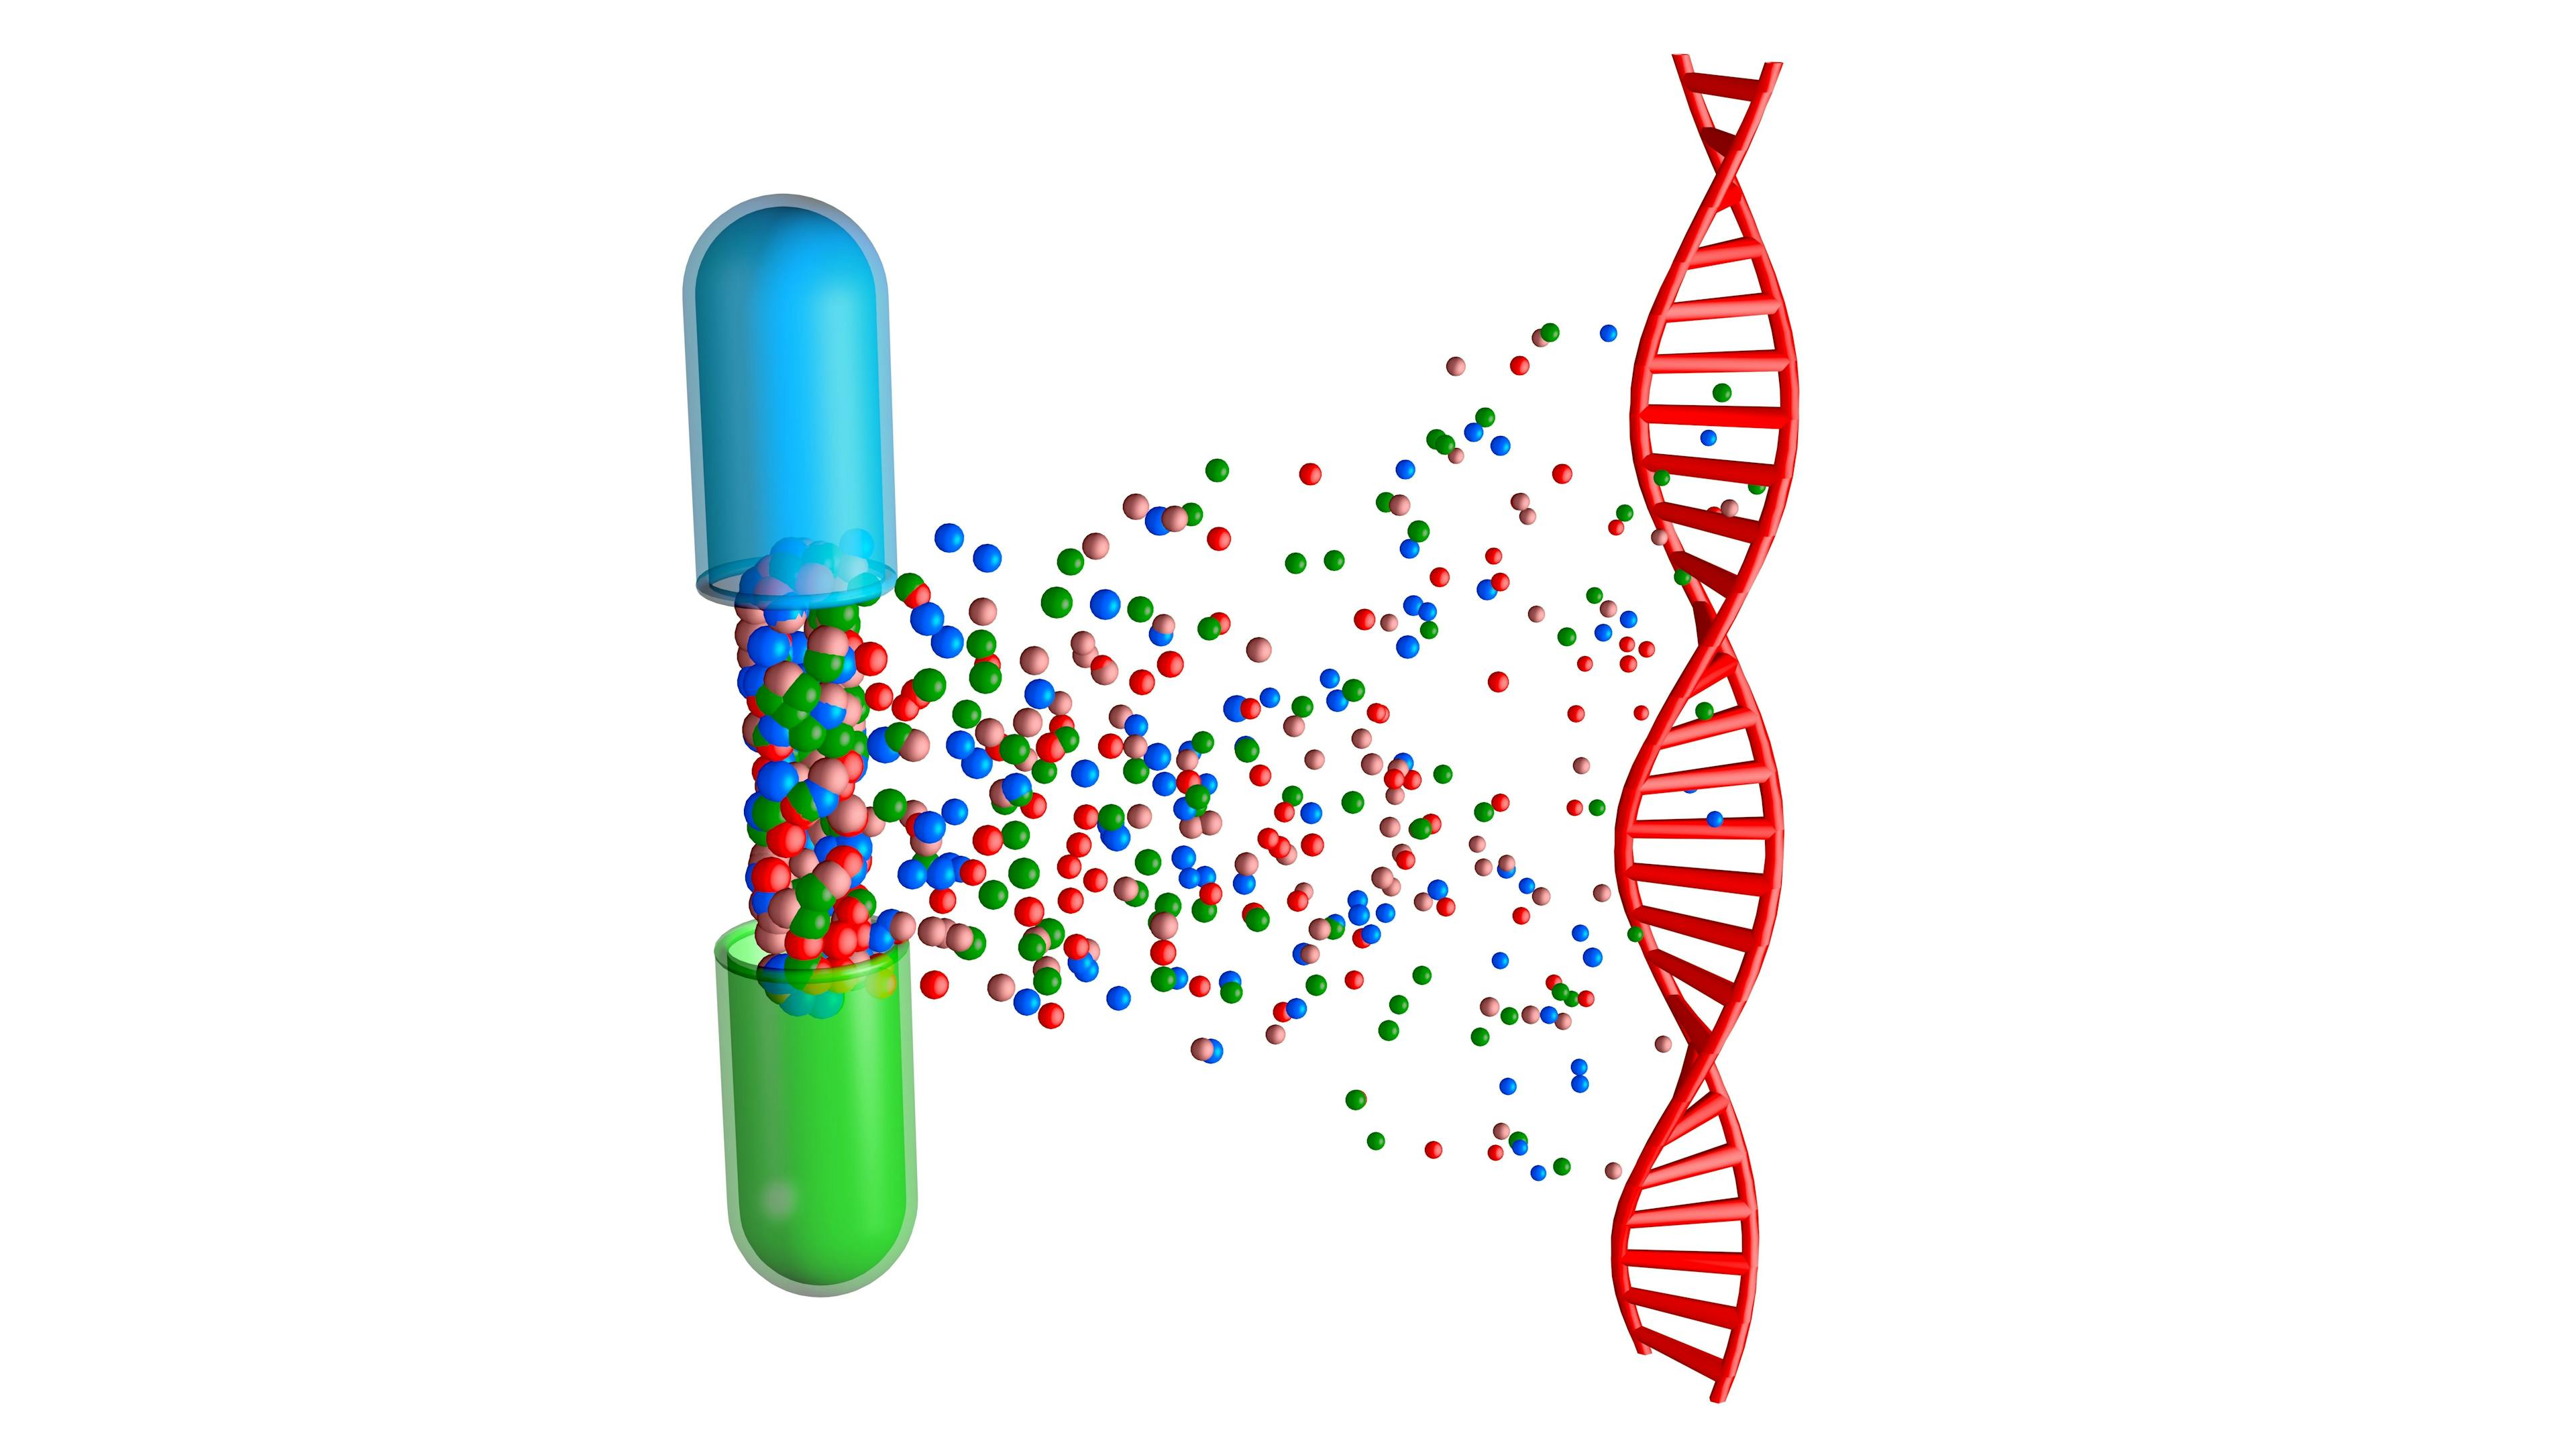 Pill capsule opens and releases drugs to DNA strand. Medication interacting with double-helix. Pharmacogenomics , Pharmacogenetics themes. 3d rendering illustration.Credit: vrx123 - stock.adobe.com